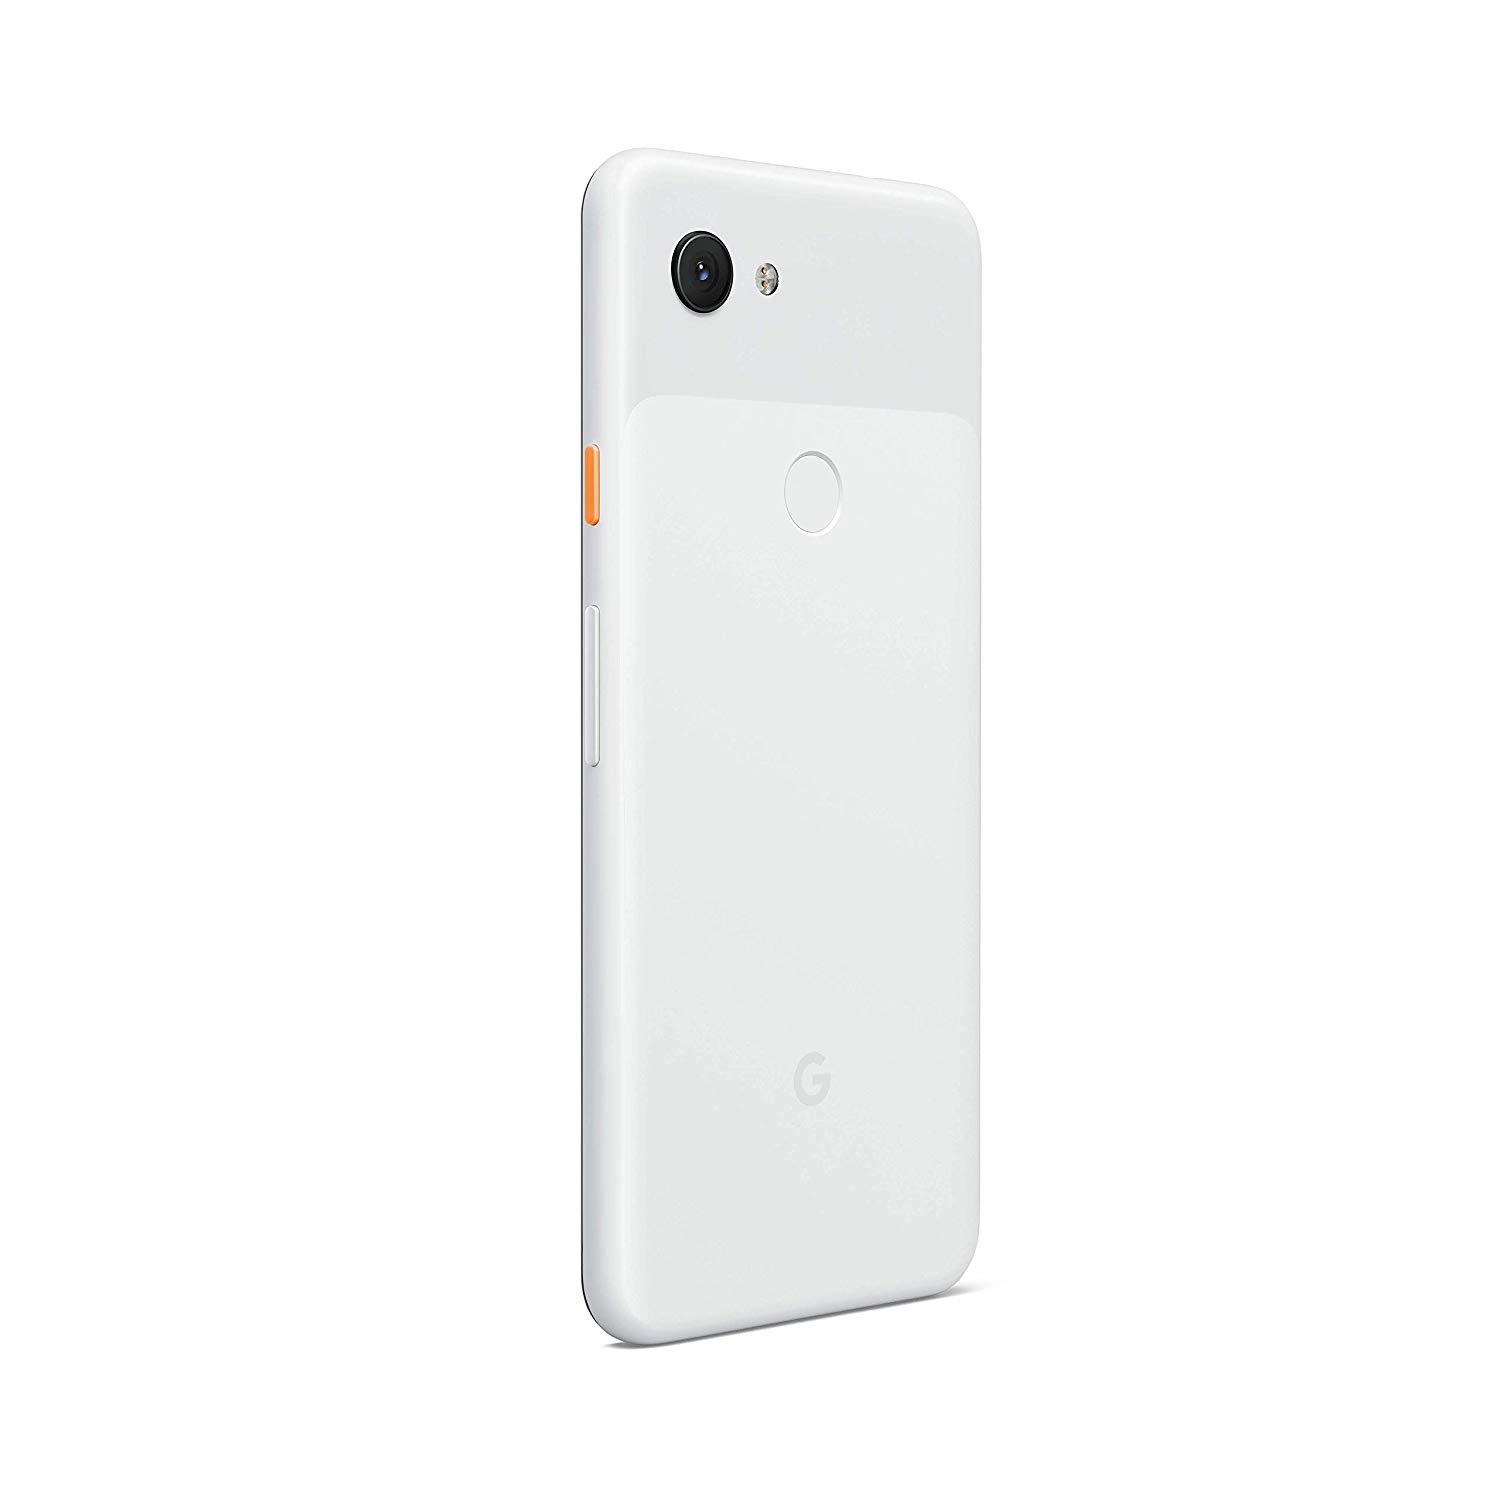 Pixel 3a Clearly White back angle view